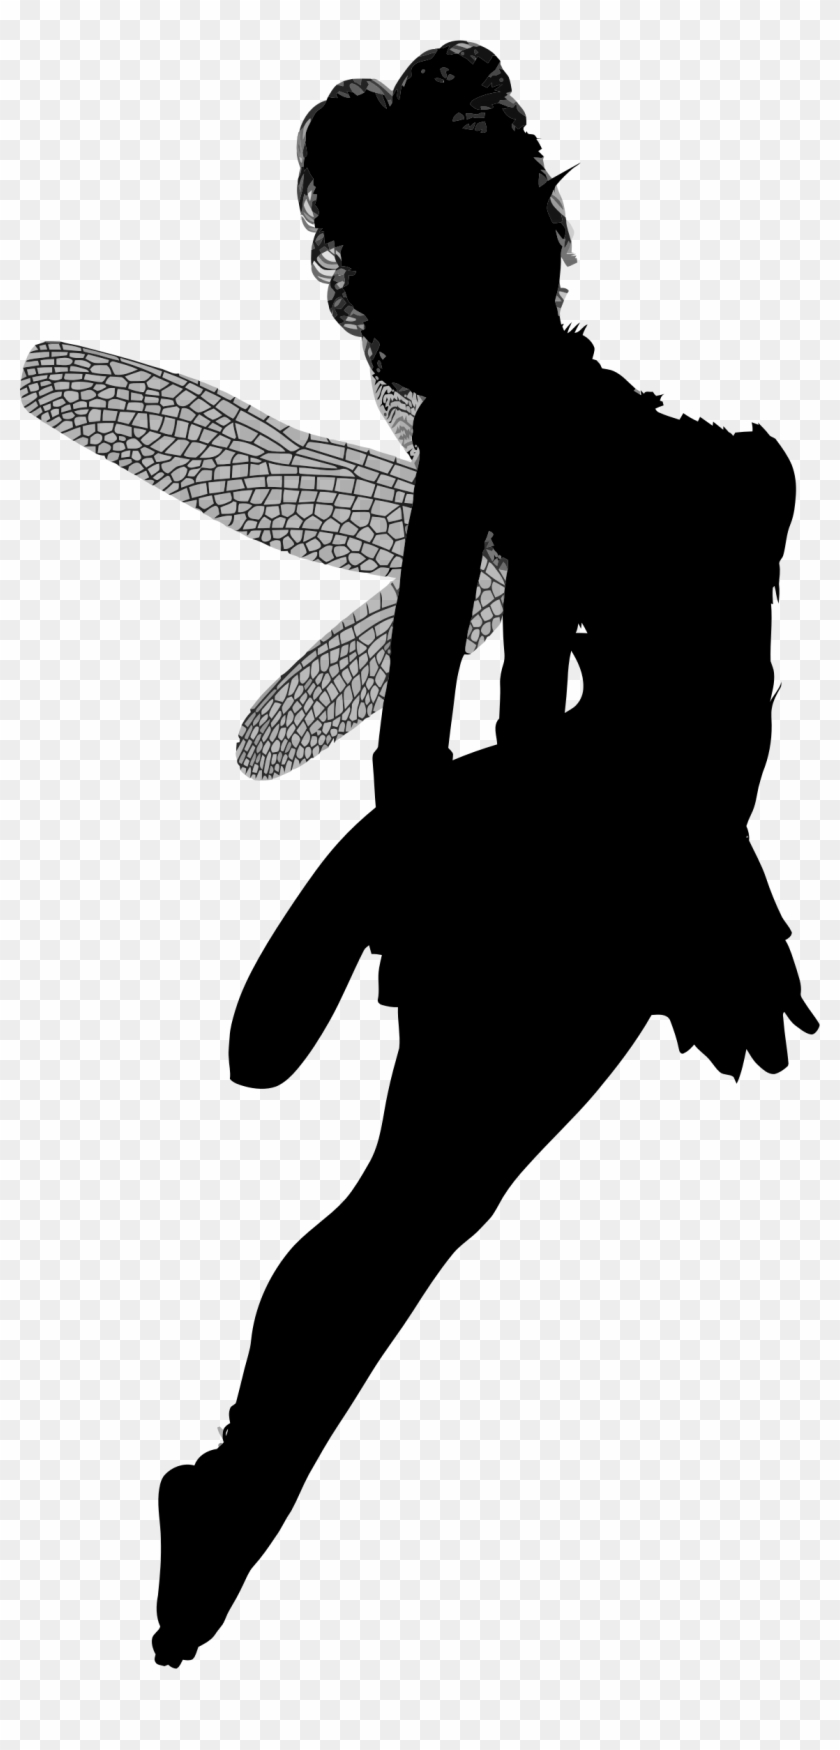 This Free Icons Png Design Of Translucent Wings Fairy Clipart #340295